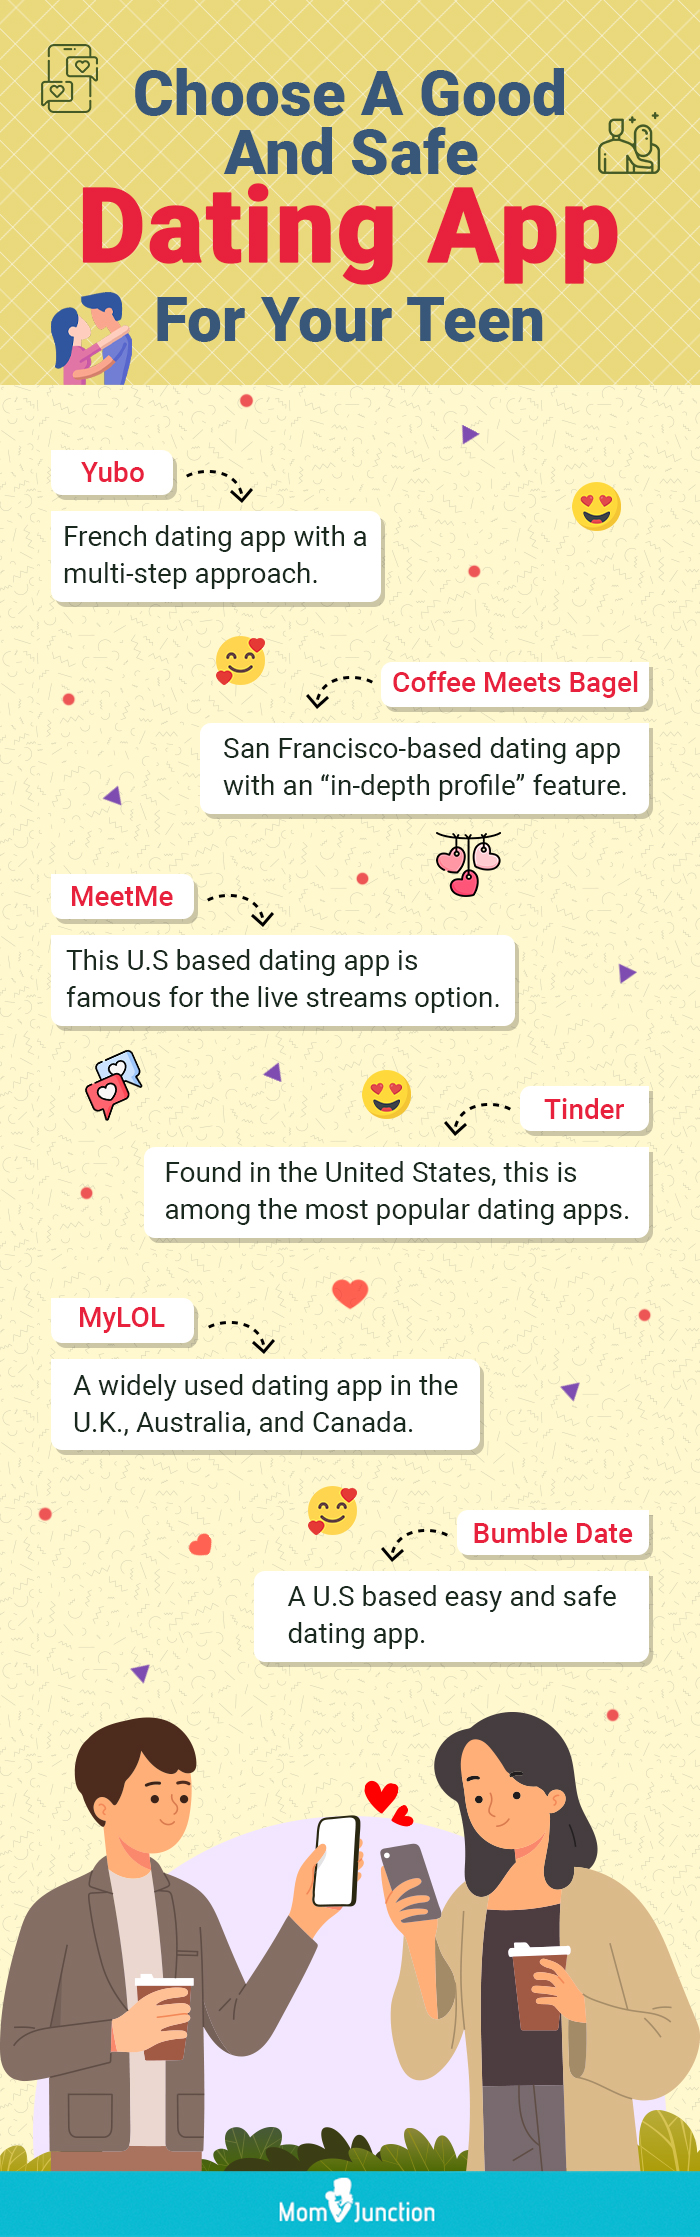 dating apps for teens (infographic)